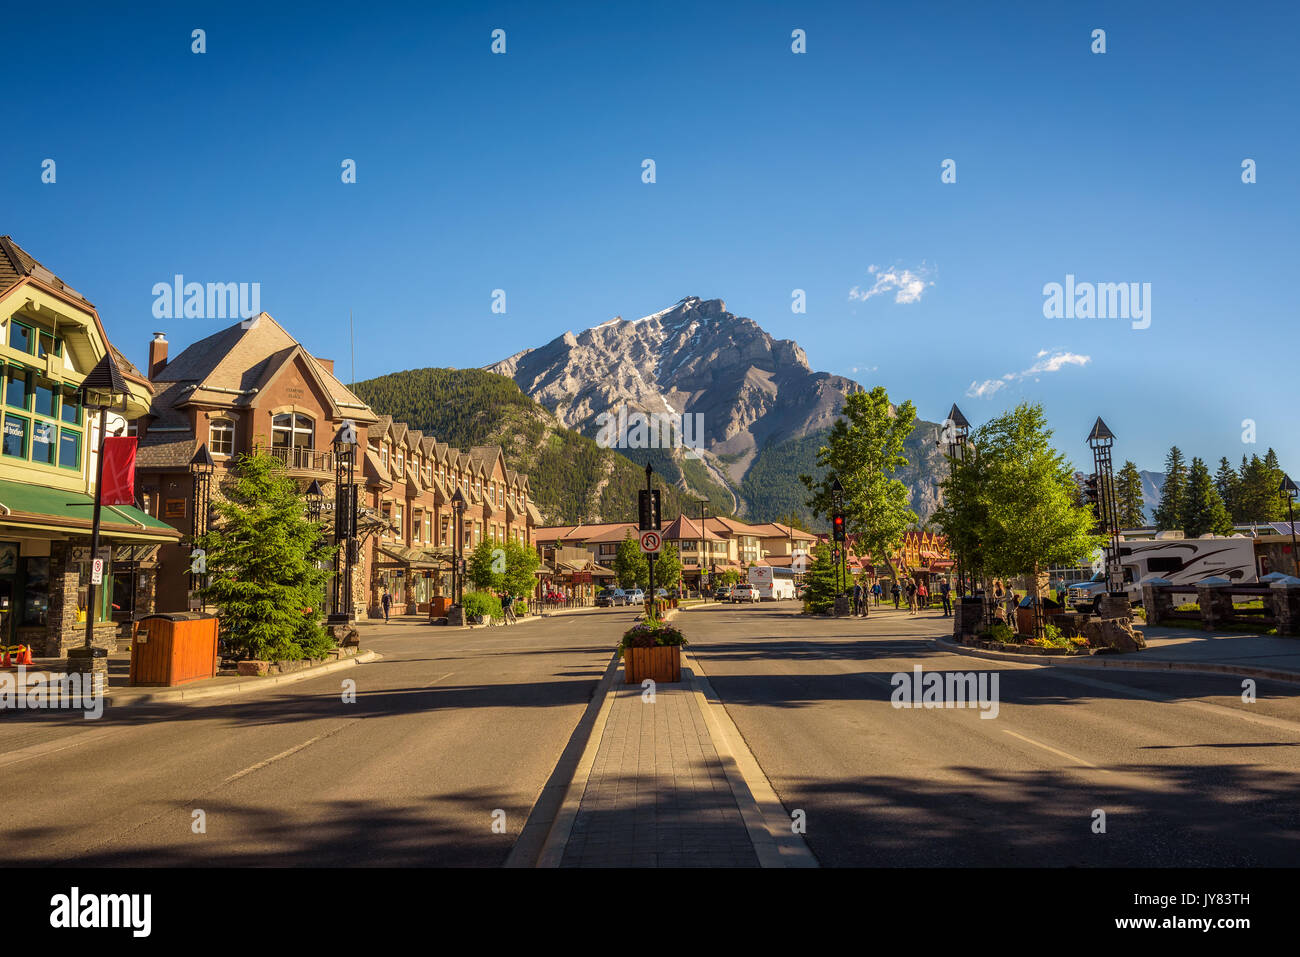 BANFF, ALBERTA, CANADA - JUNE 27, 2017 :  Scenic street view of the Banff Avenue in a sunny summer day. Banff is a resort town and popular tourist des Stock Photo